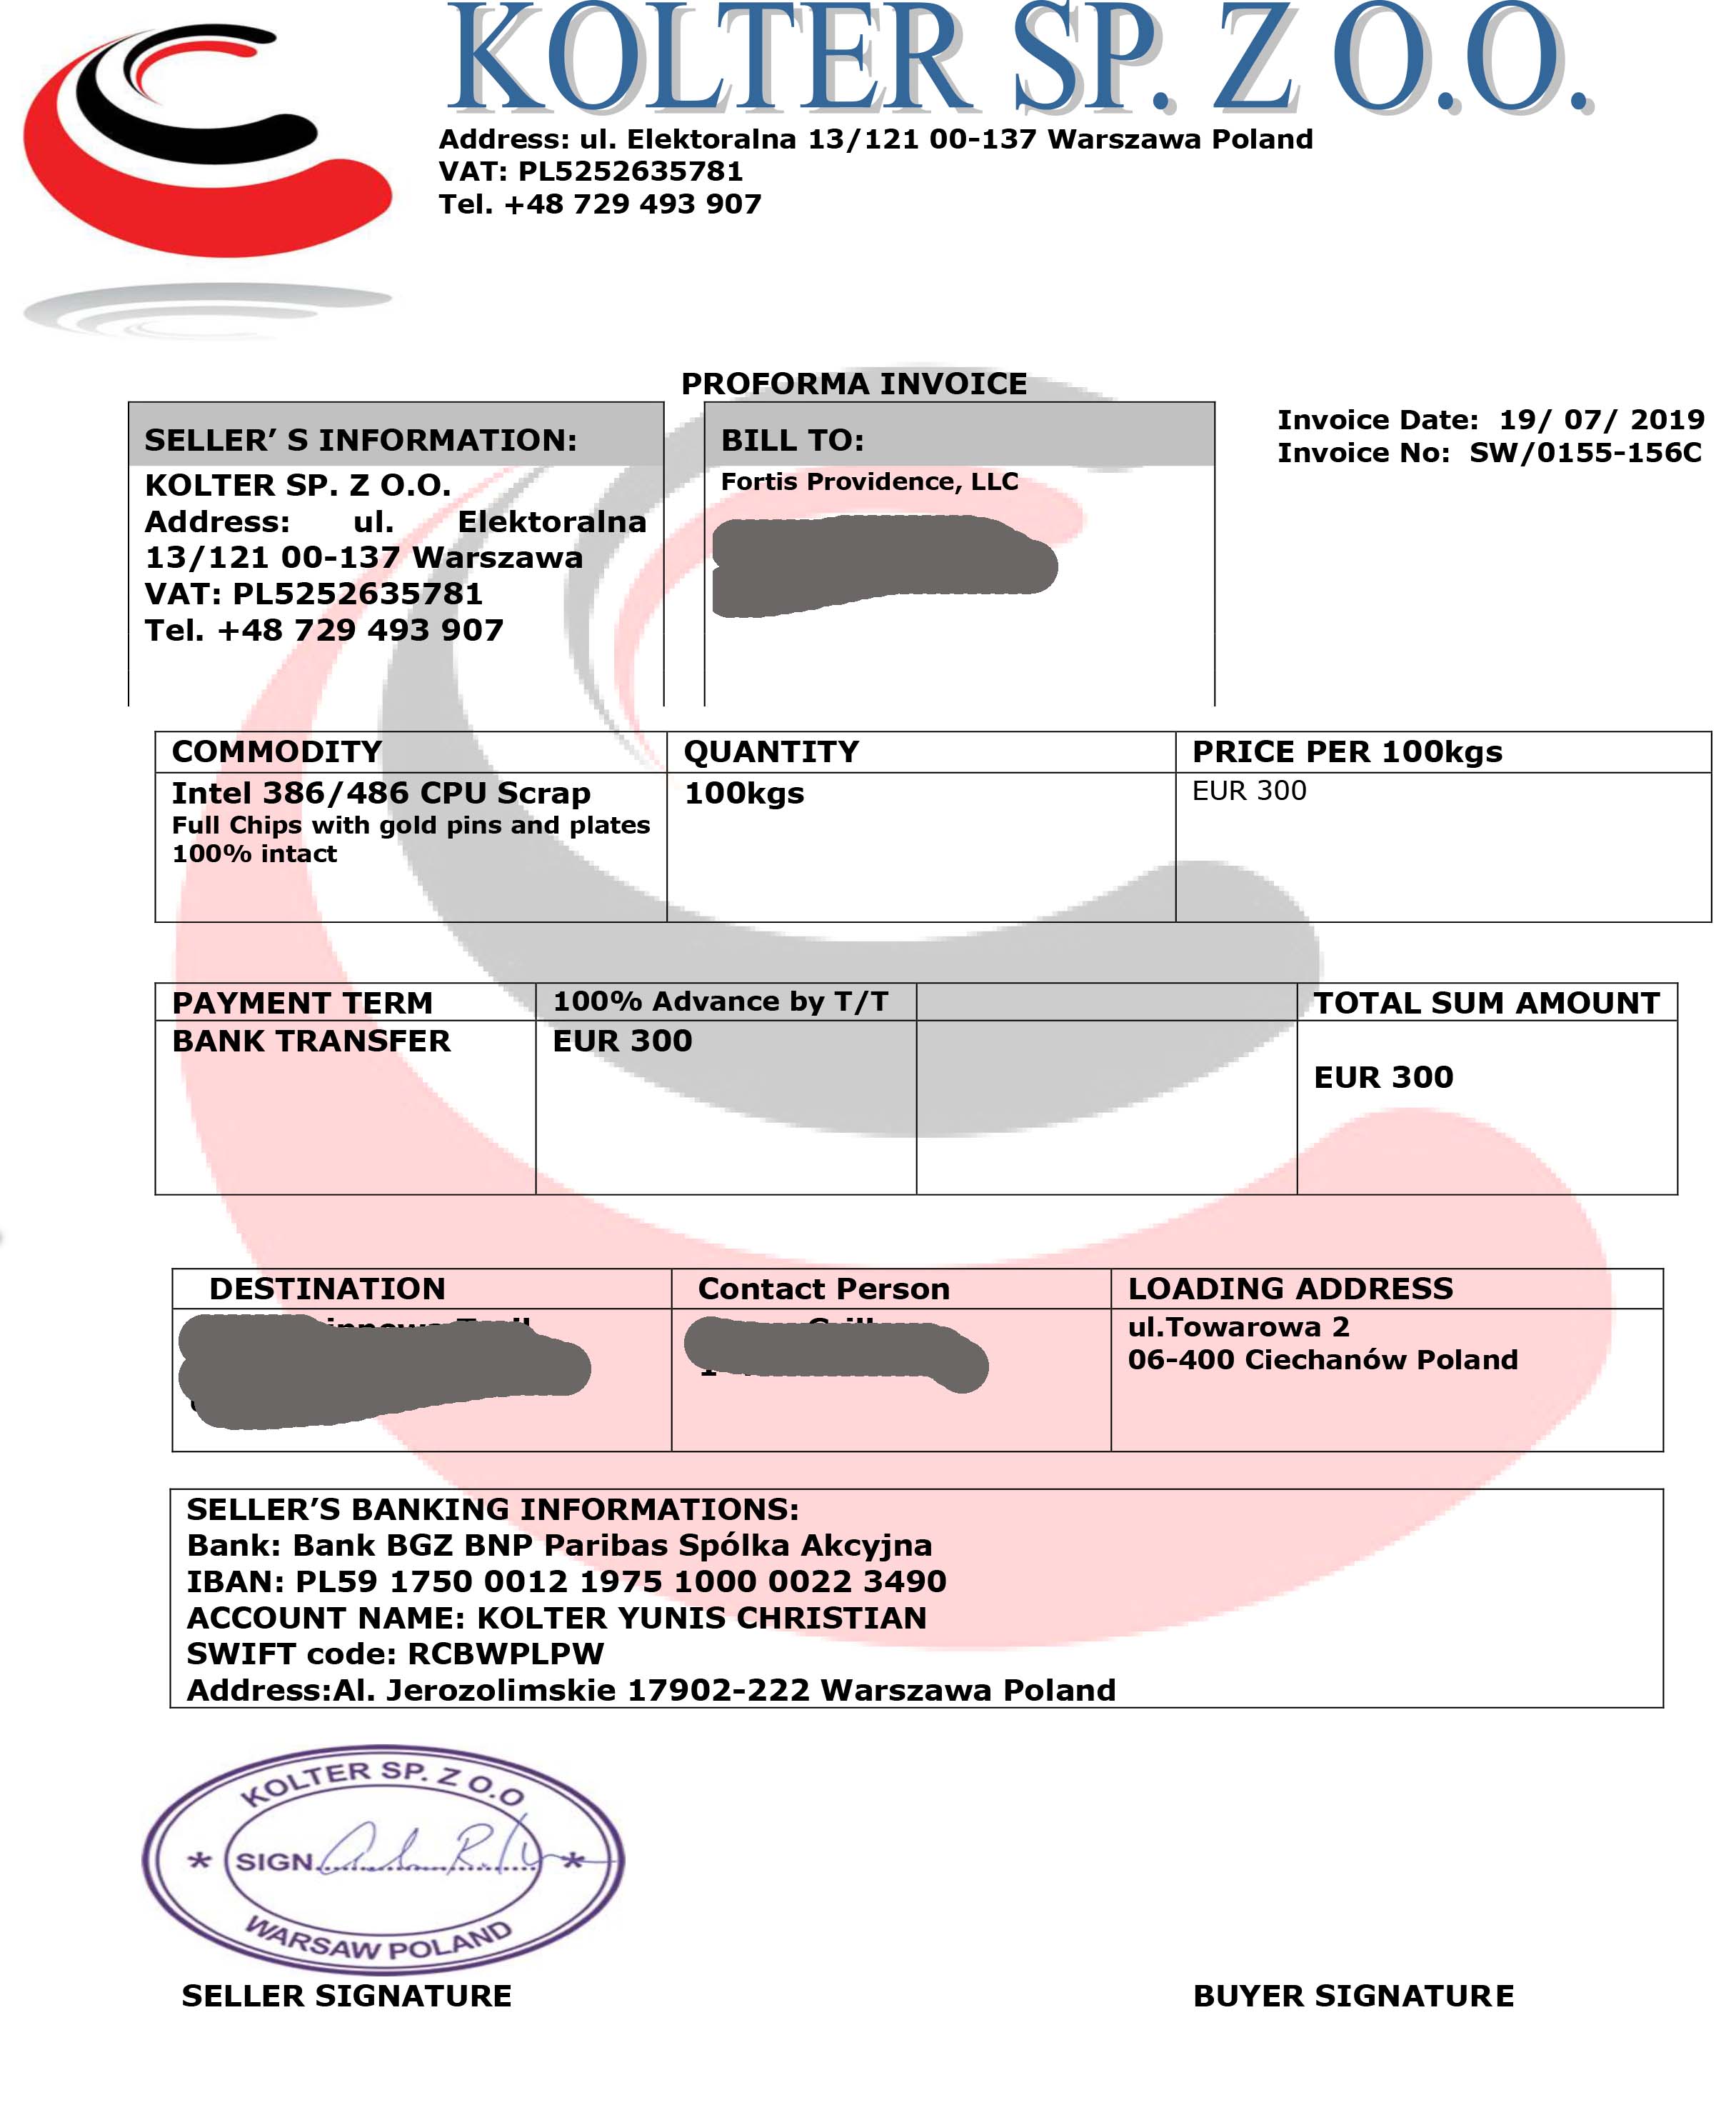 Kolter SP Zoo Invoice with VAT and Bank Info